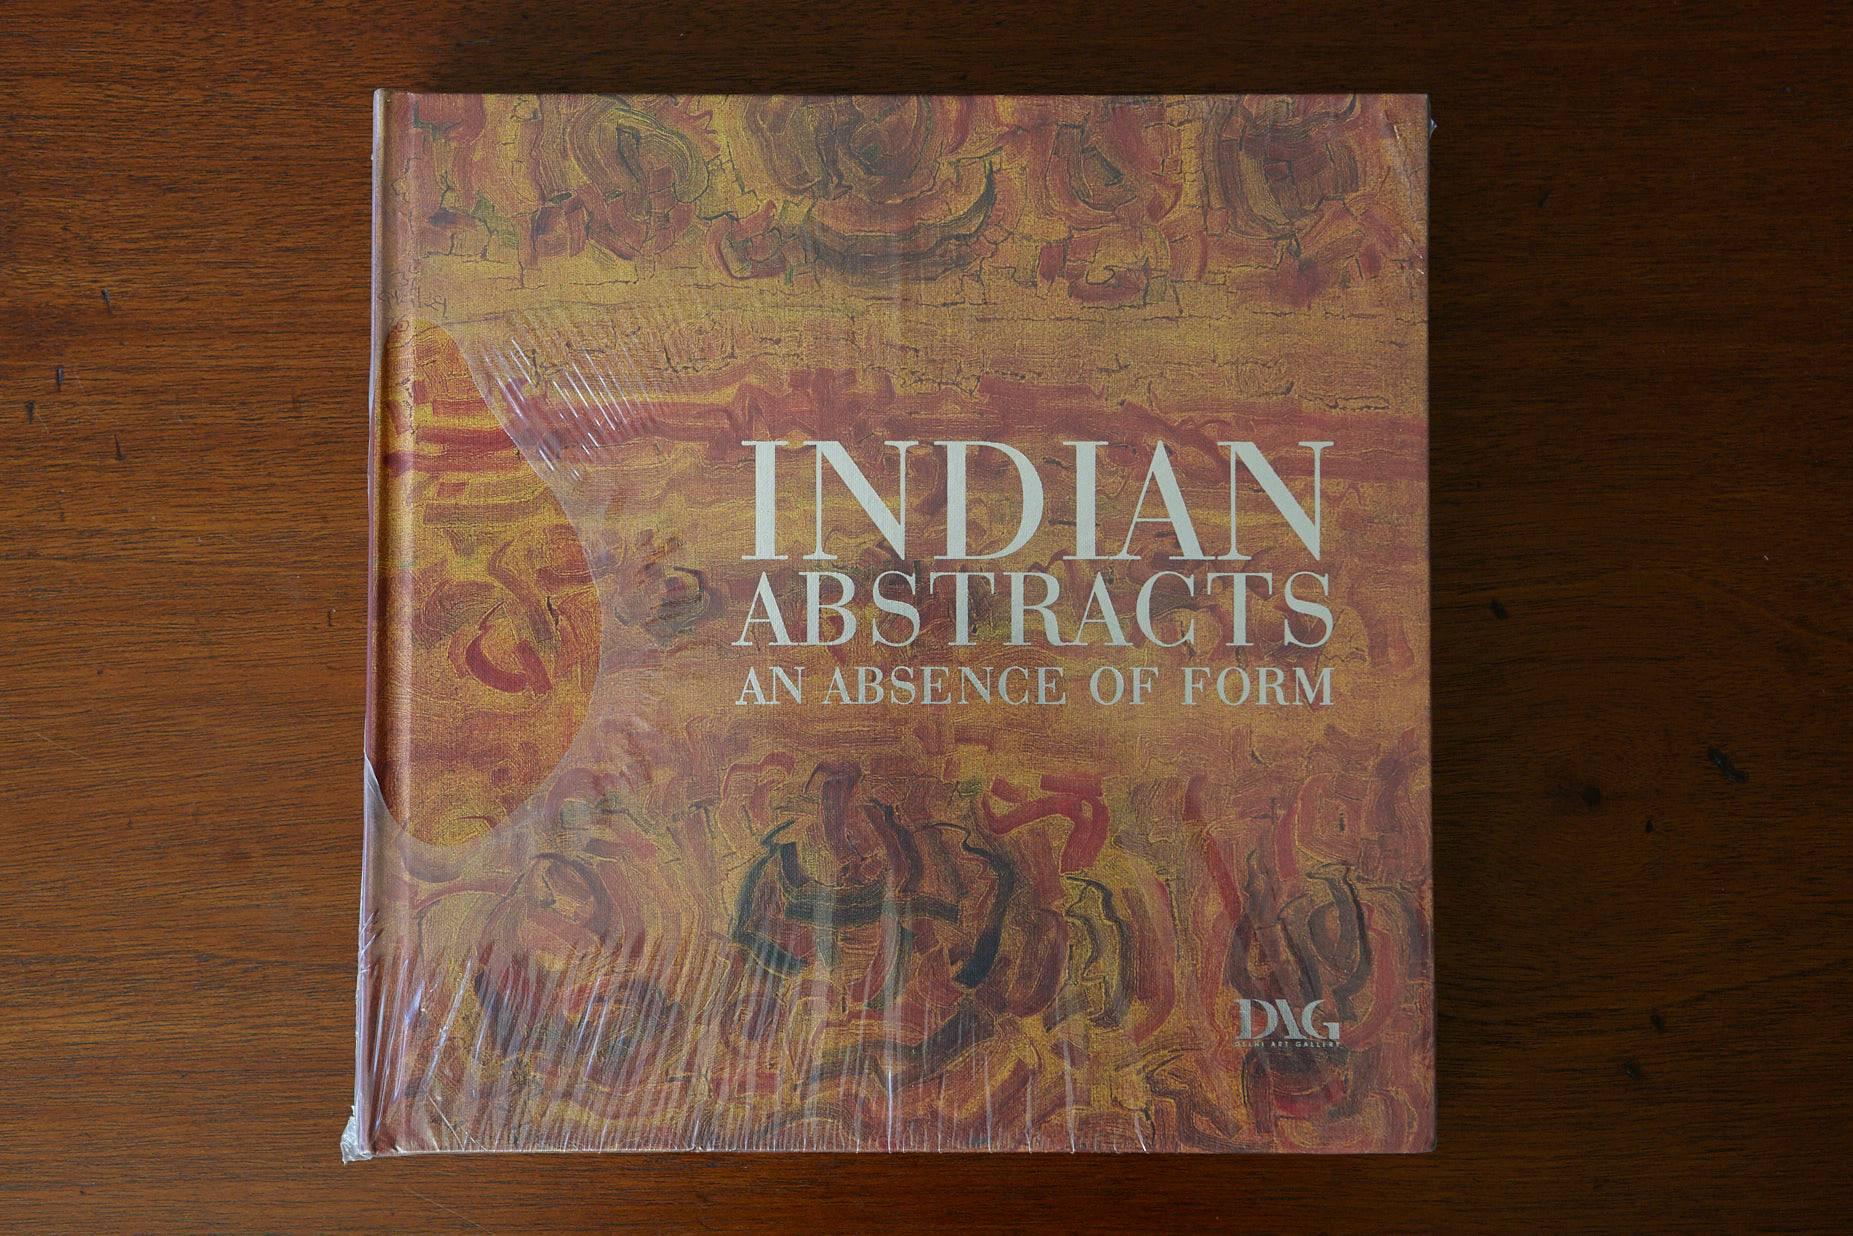 Indian Abstracts, An Absence of Form by Ashish Anand, published by the Delhi Art Gallery (DAG) in 2014.
Hardcover, circa 400 pages, new, in original seal.

An over 400-page, substantial volume of art scholarship will accompany this significant